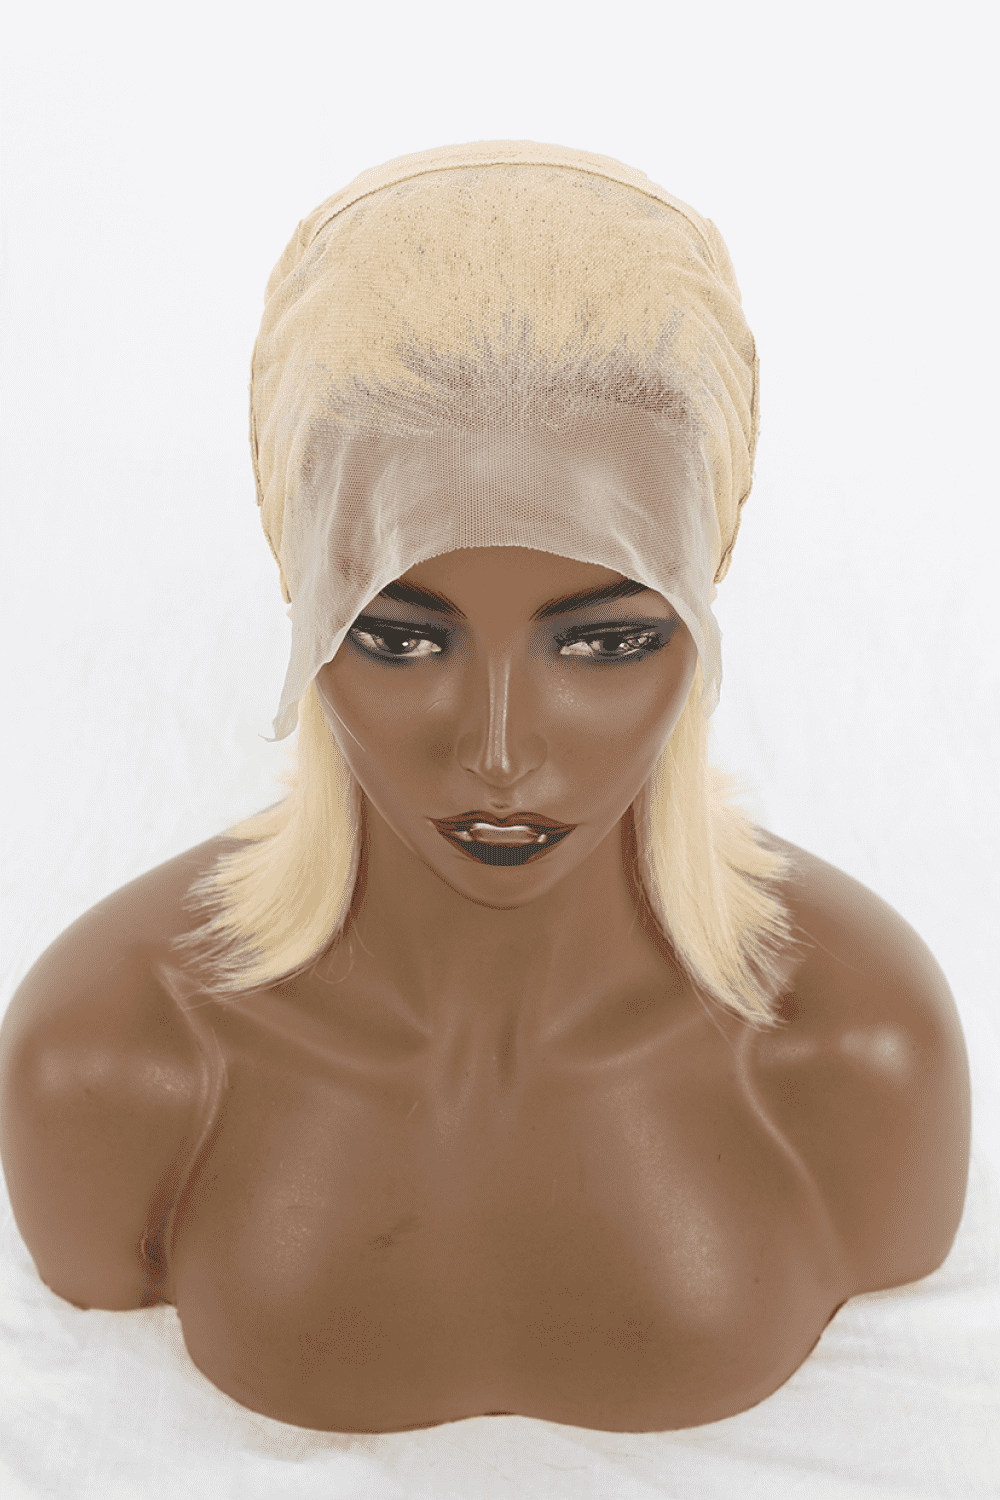 a mannequin head with a wig and a turban